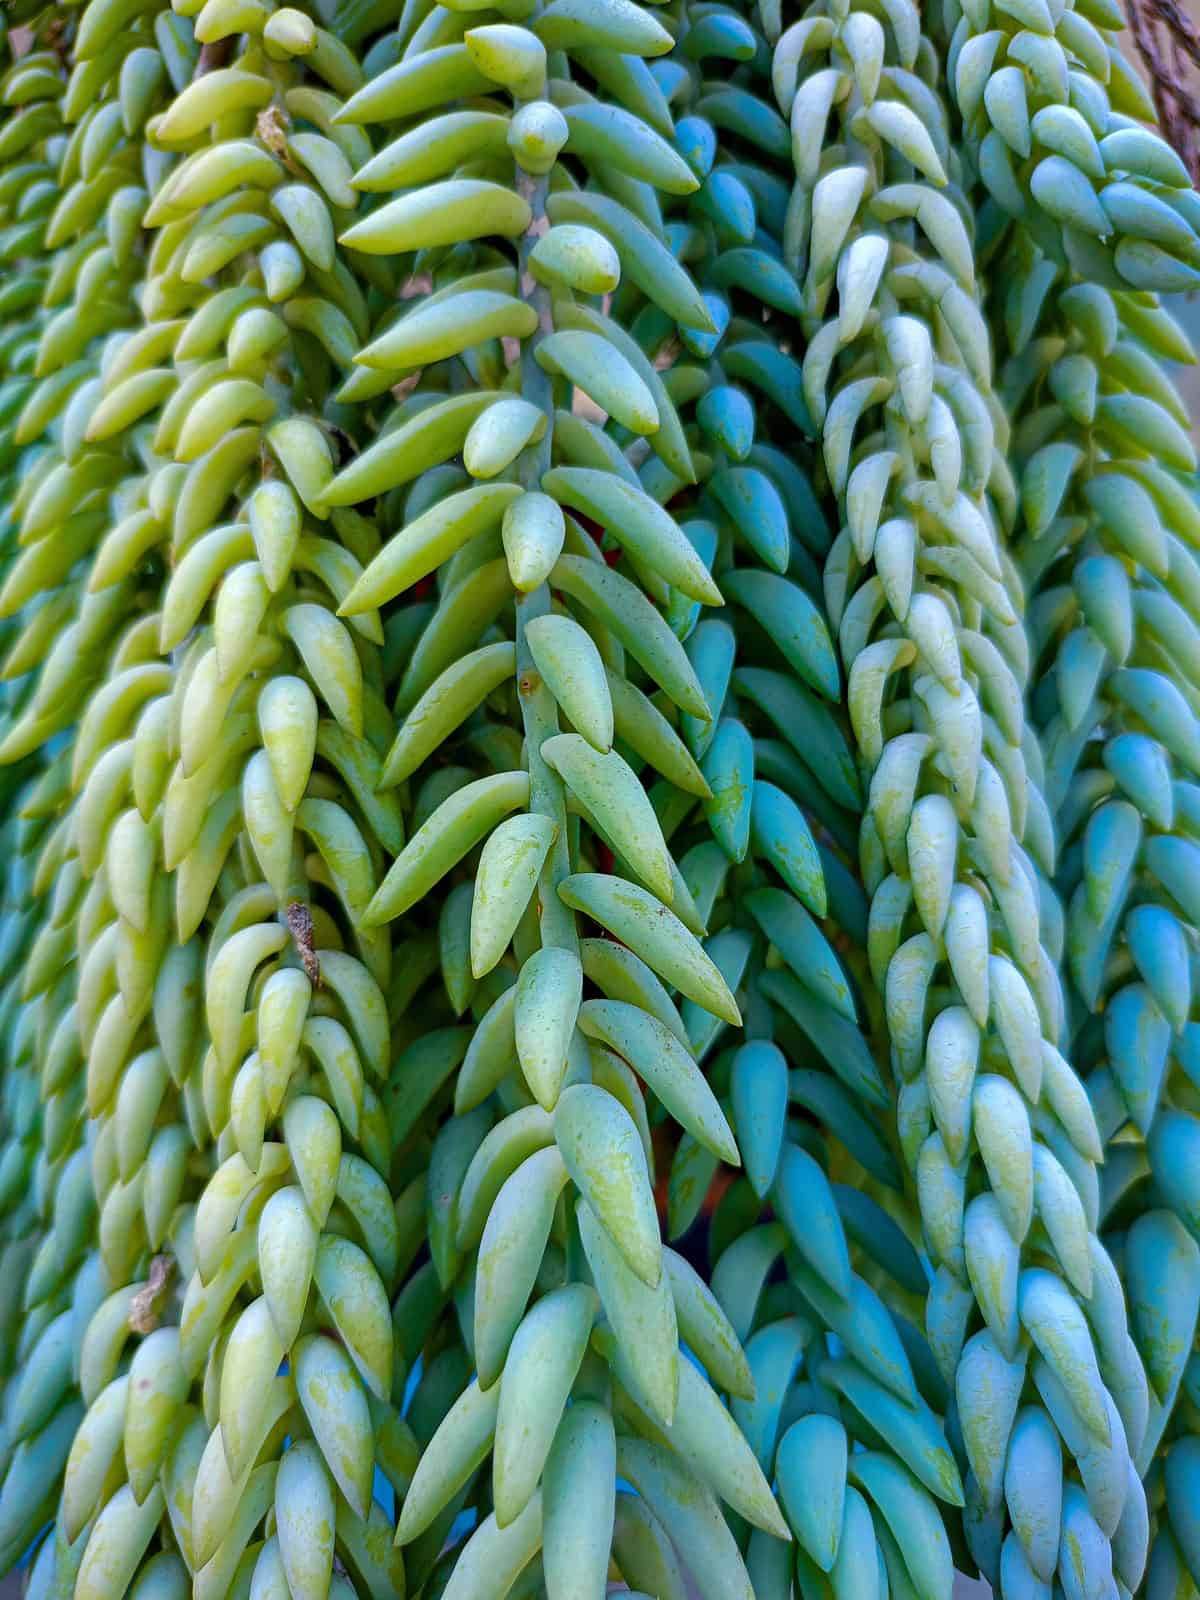 Bright green Jelly bean like leaves of a Burro's Tail